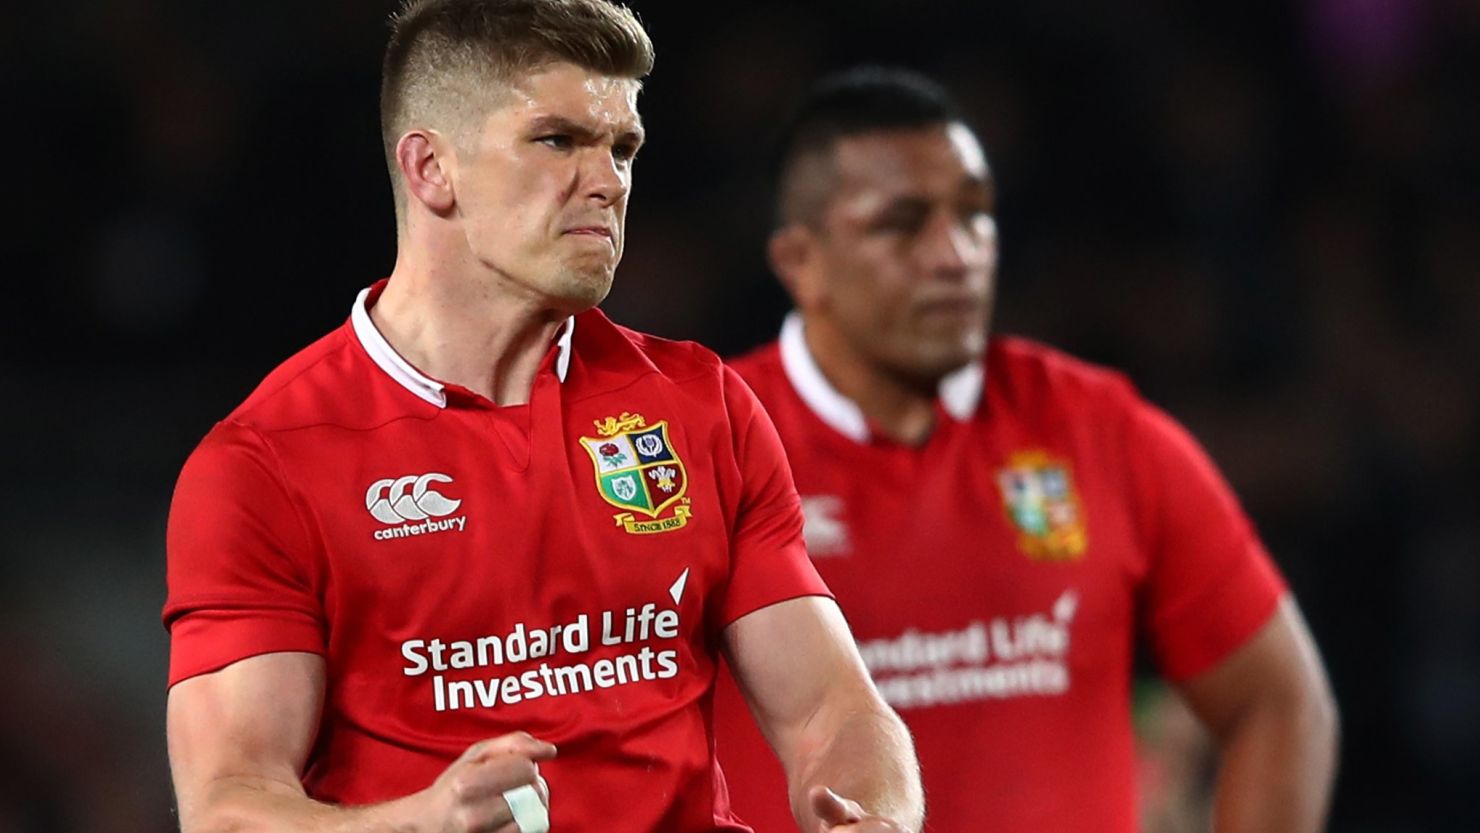 Owen Farrell kicked 12 points for the Lions, including the penalty to level the match at 15-15.